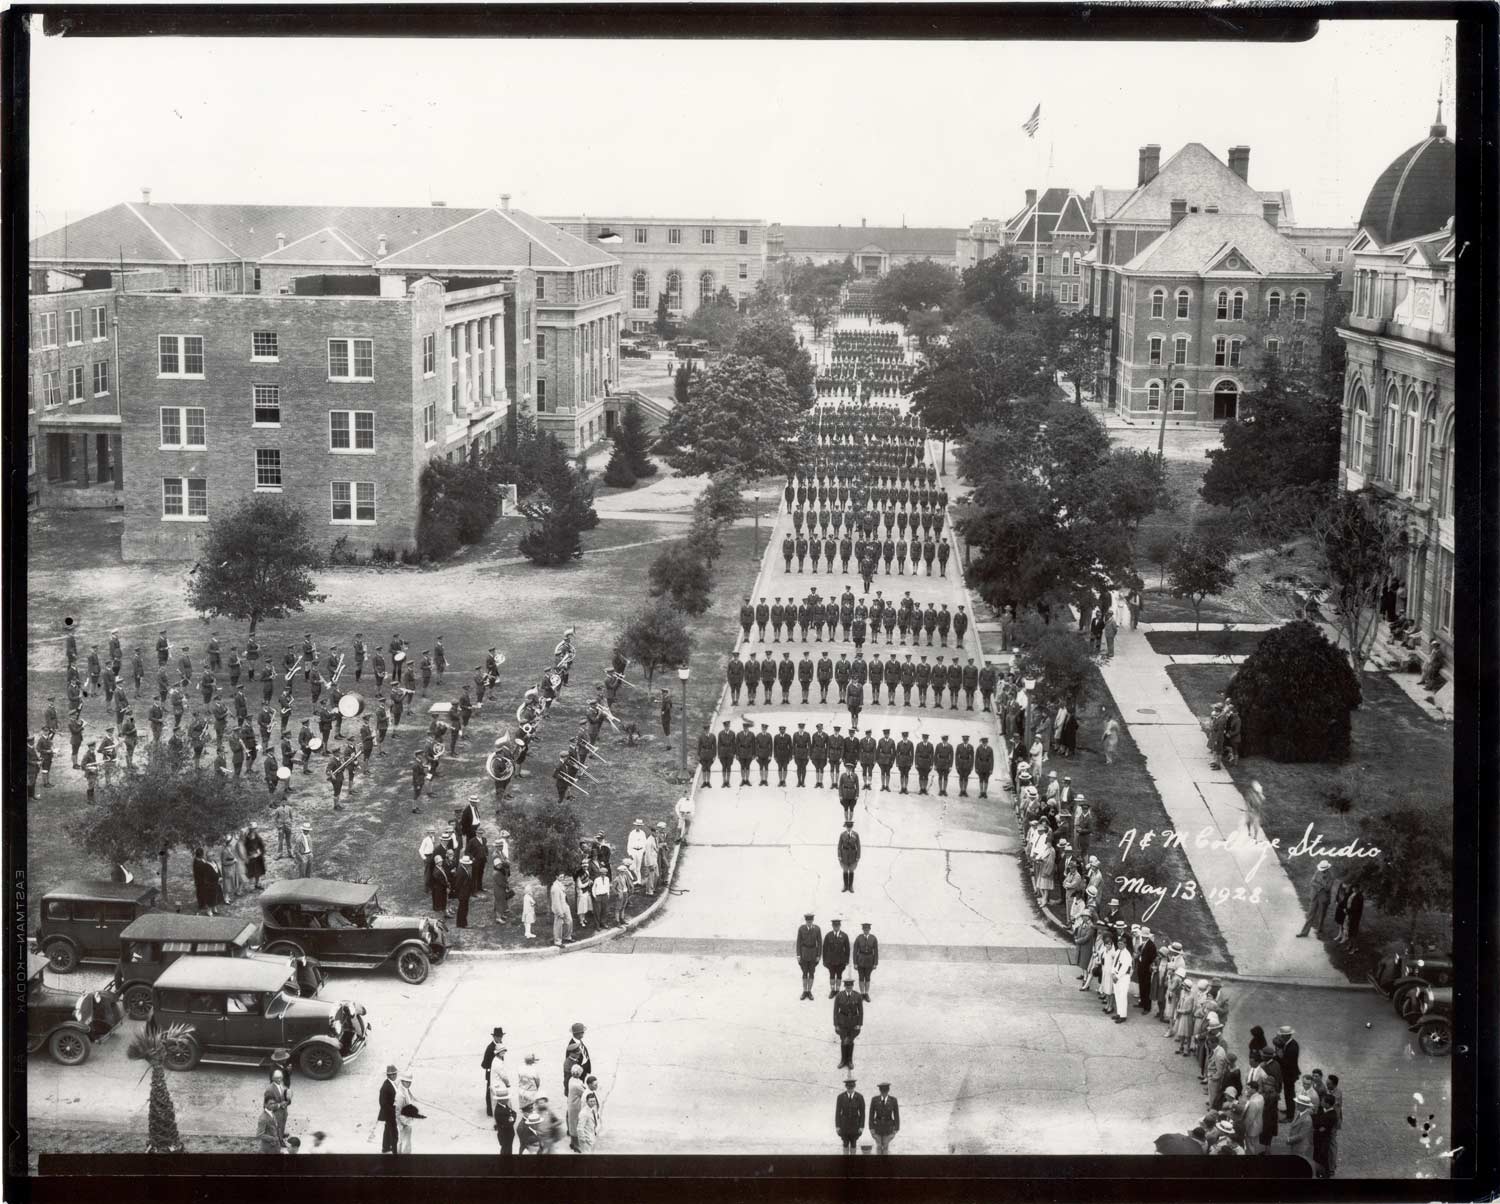 A 1928 photo of the corps of cadets marching in